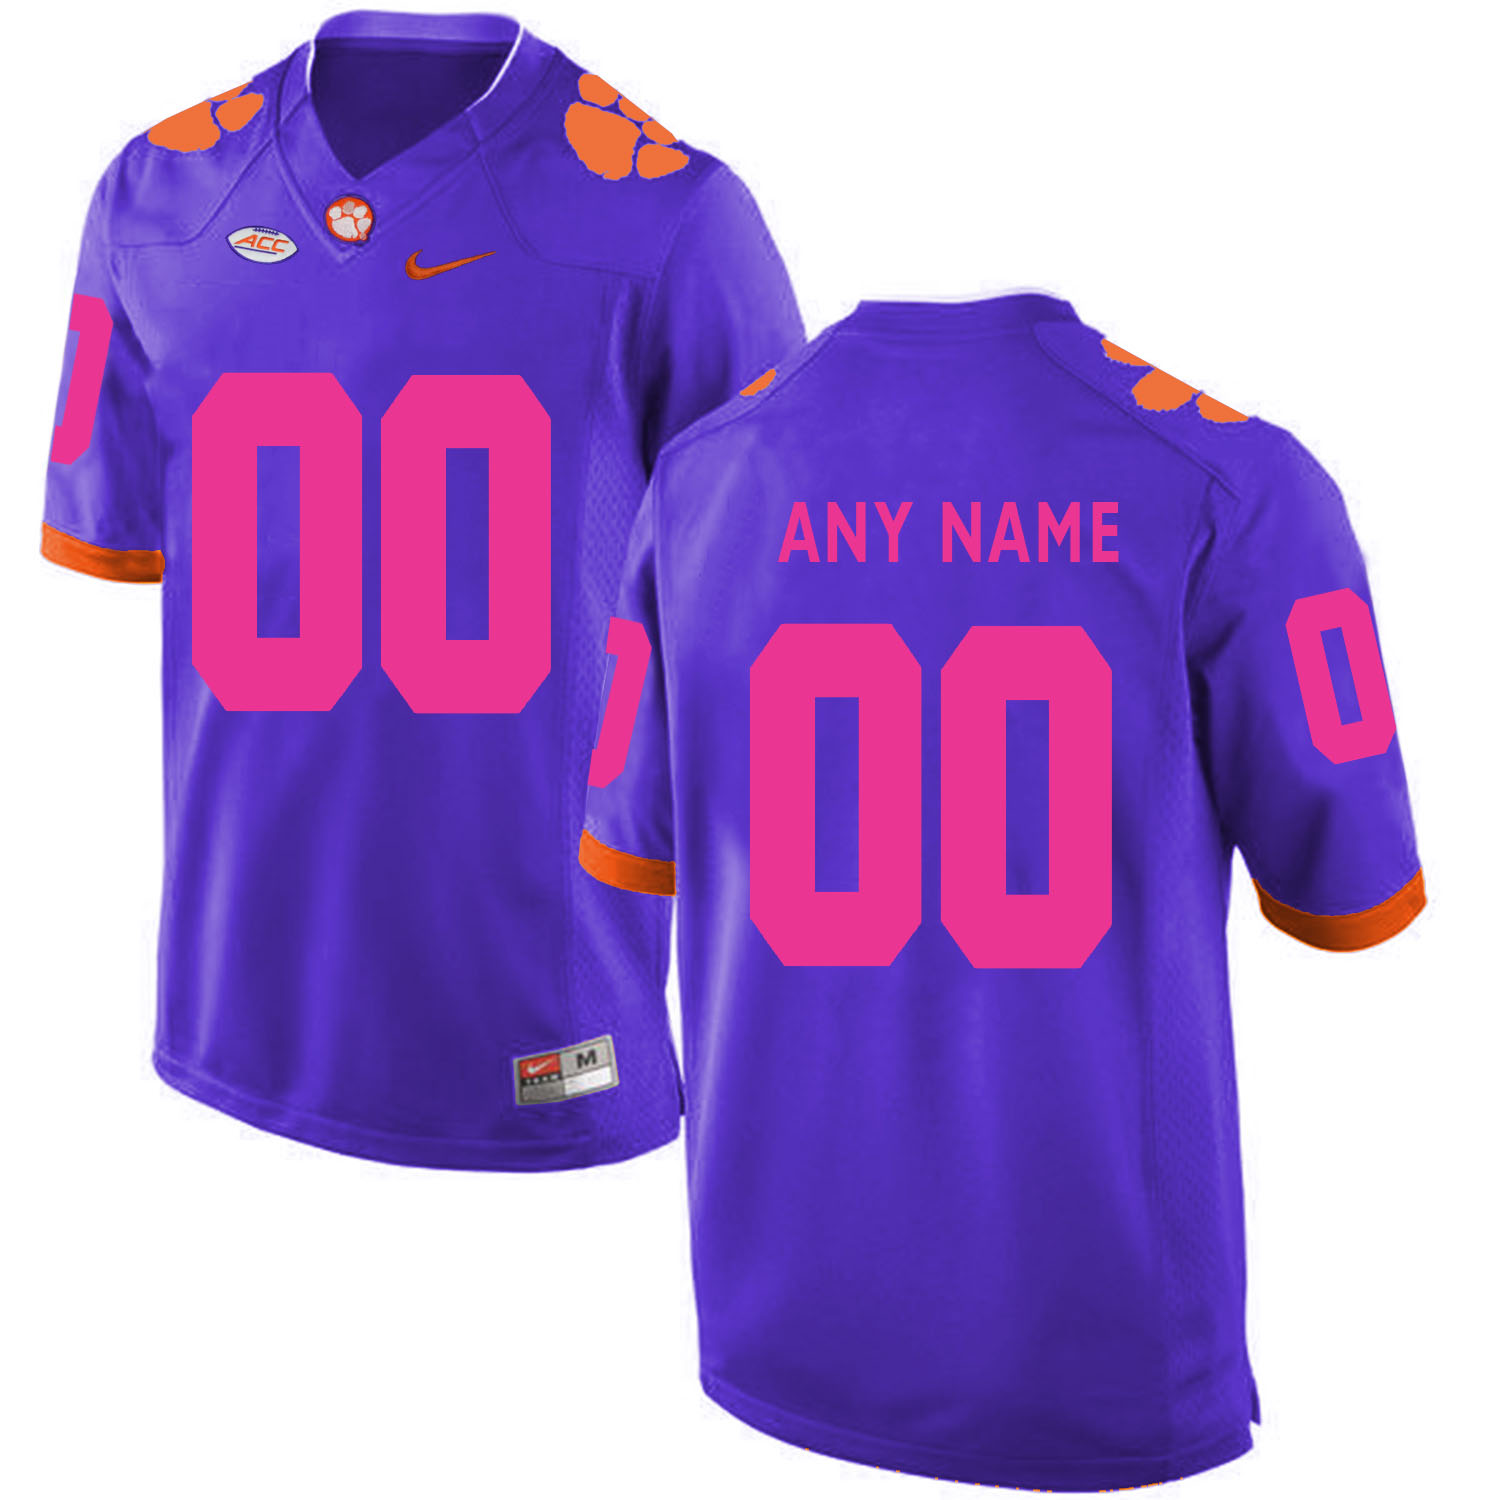 Clemson Tigers Purple 2018 Breast Cancer Awareness Men's Customized College Football Jersey